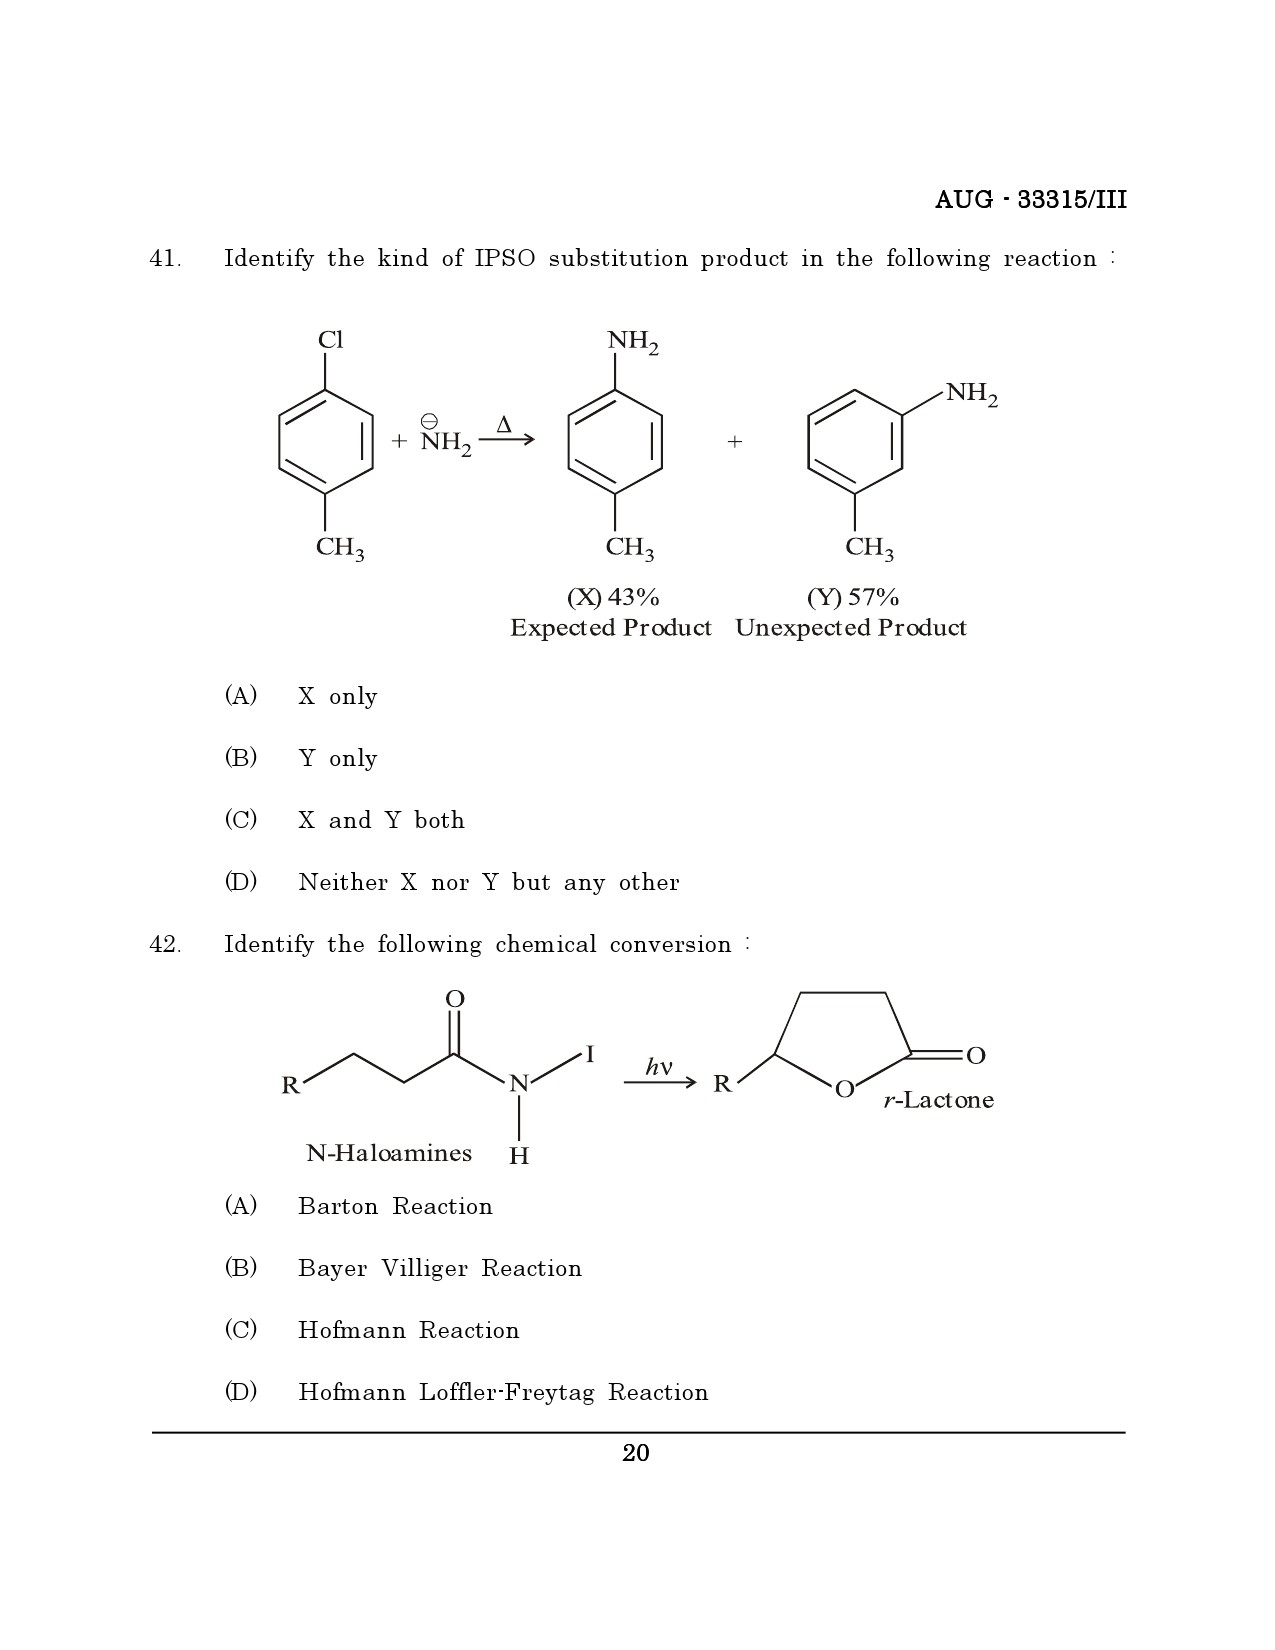 Maharashtra SET Chemical Sciences Question Paper III August 2015 19